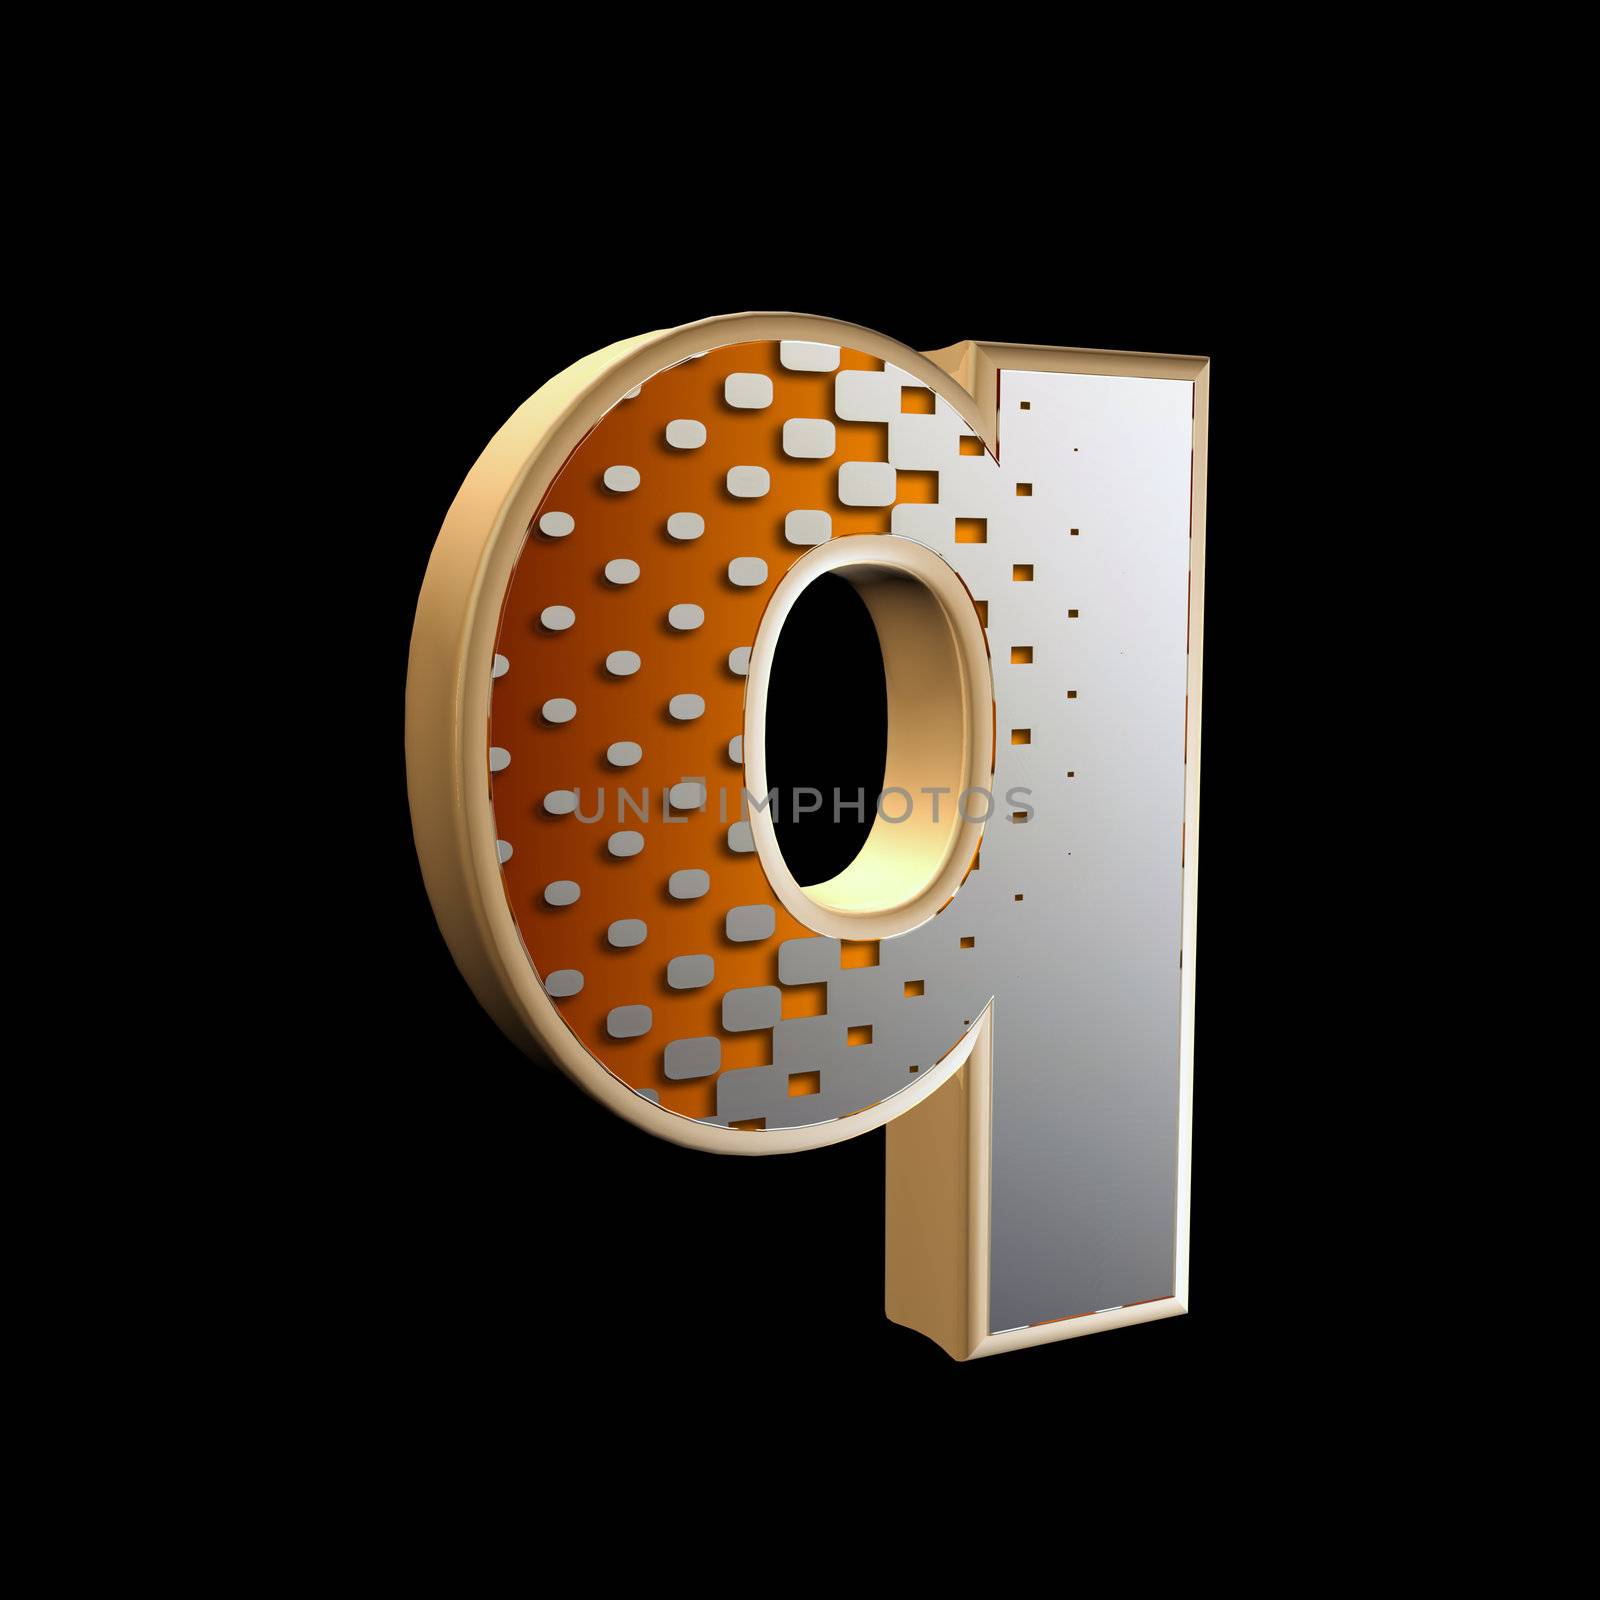 abstract 3d letter with halftone texture - q by chrisroll